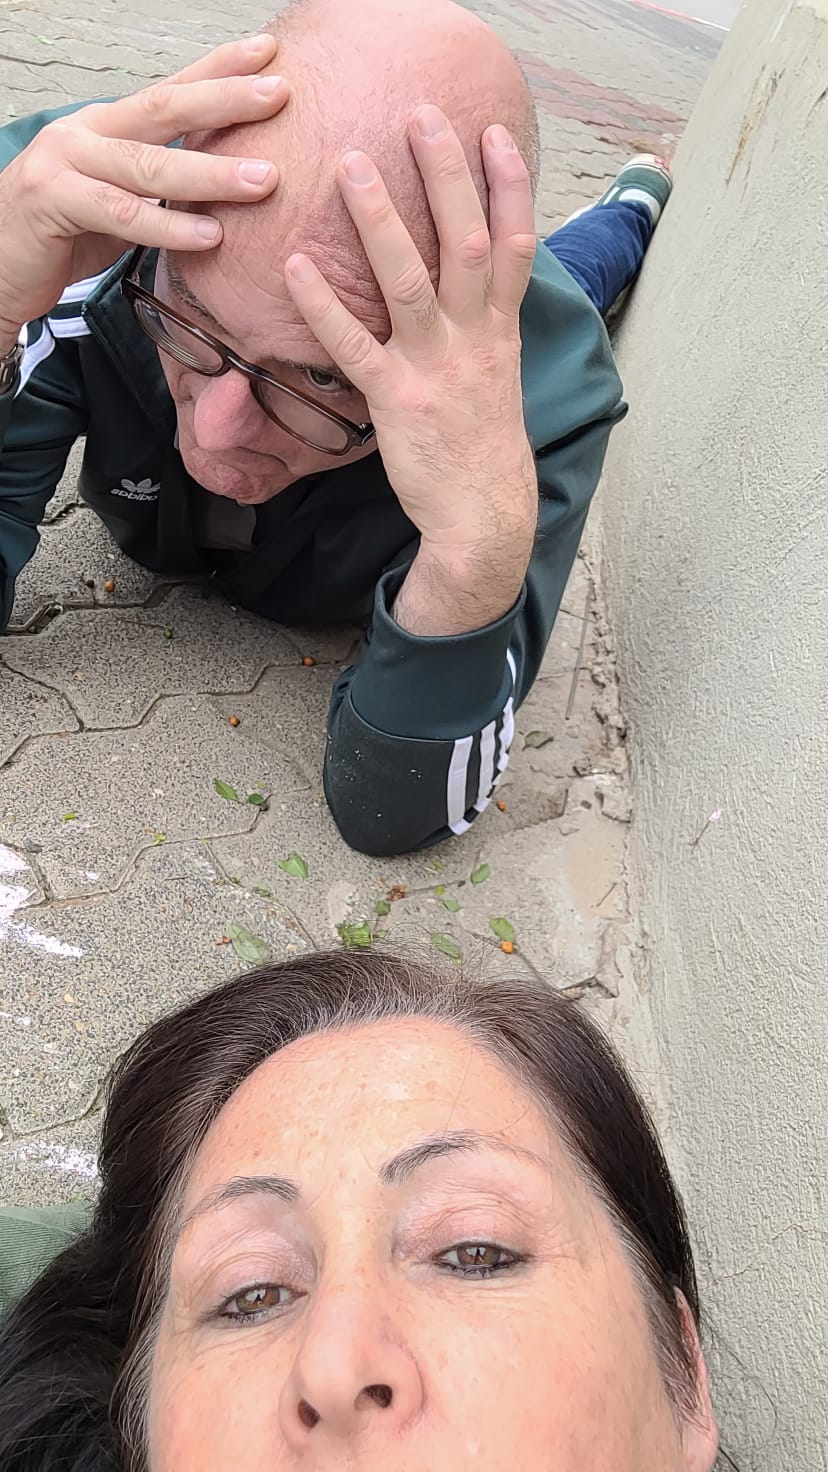 The author and his wife taking cover as the Iron Dome intercepts 2 missiles fired by Hamas at Raanana, a city in the center of Israel."   "The author and his wife taking cover as the Iron Dome intercepts 2 missiles fired by Hamas at Raanana, a city in the center of Israel.